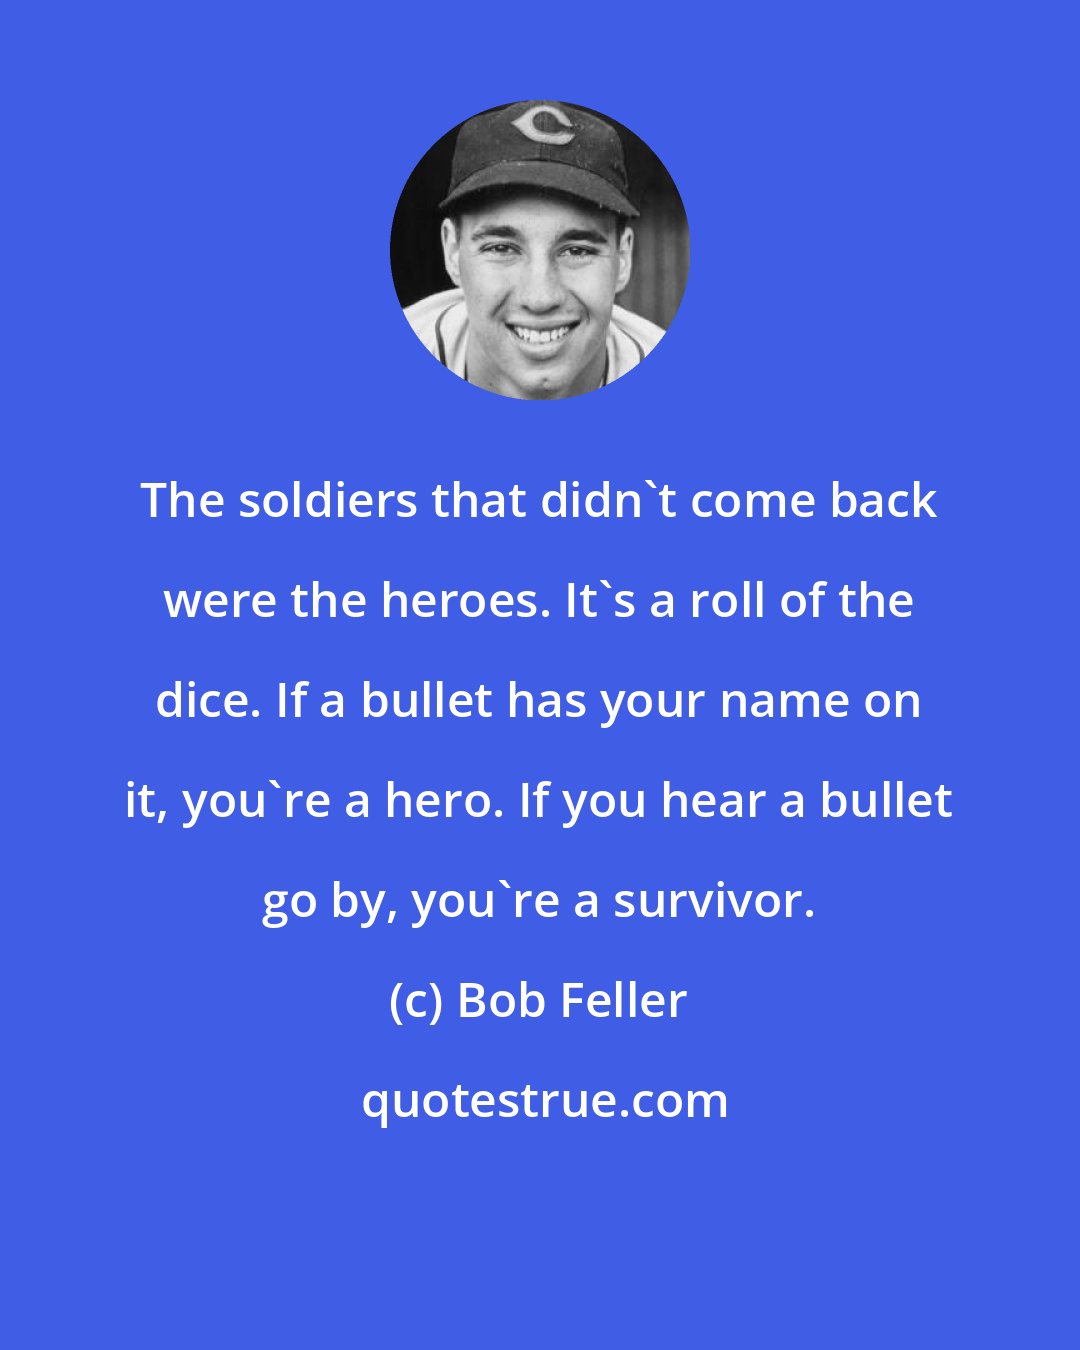 Bob Feller: The soldiers that didn't come back were the heroes. It's a roll of the dice. If a bullet has your name on it, you're a hero. If you hear a bullet go by, you're a survivor.